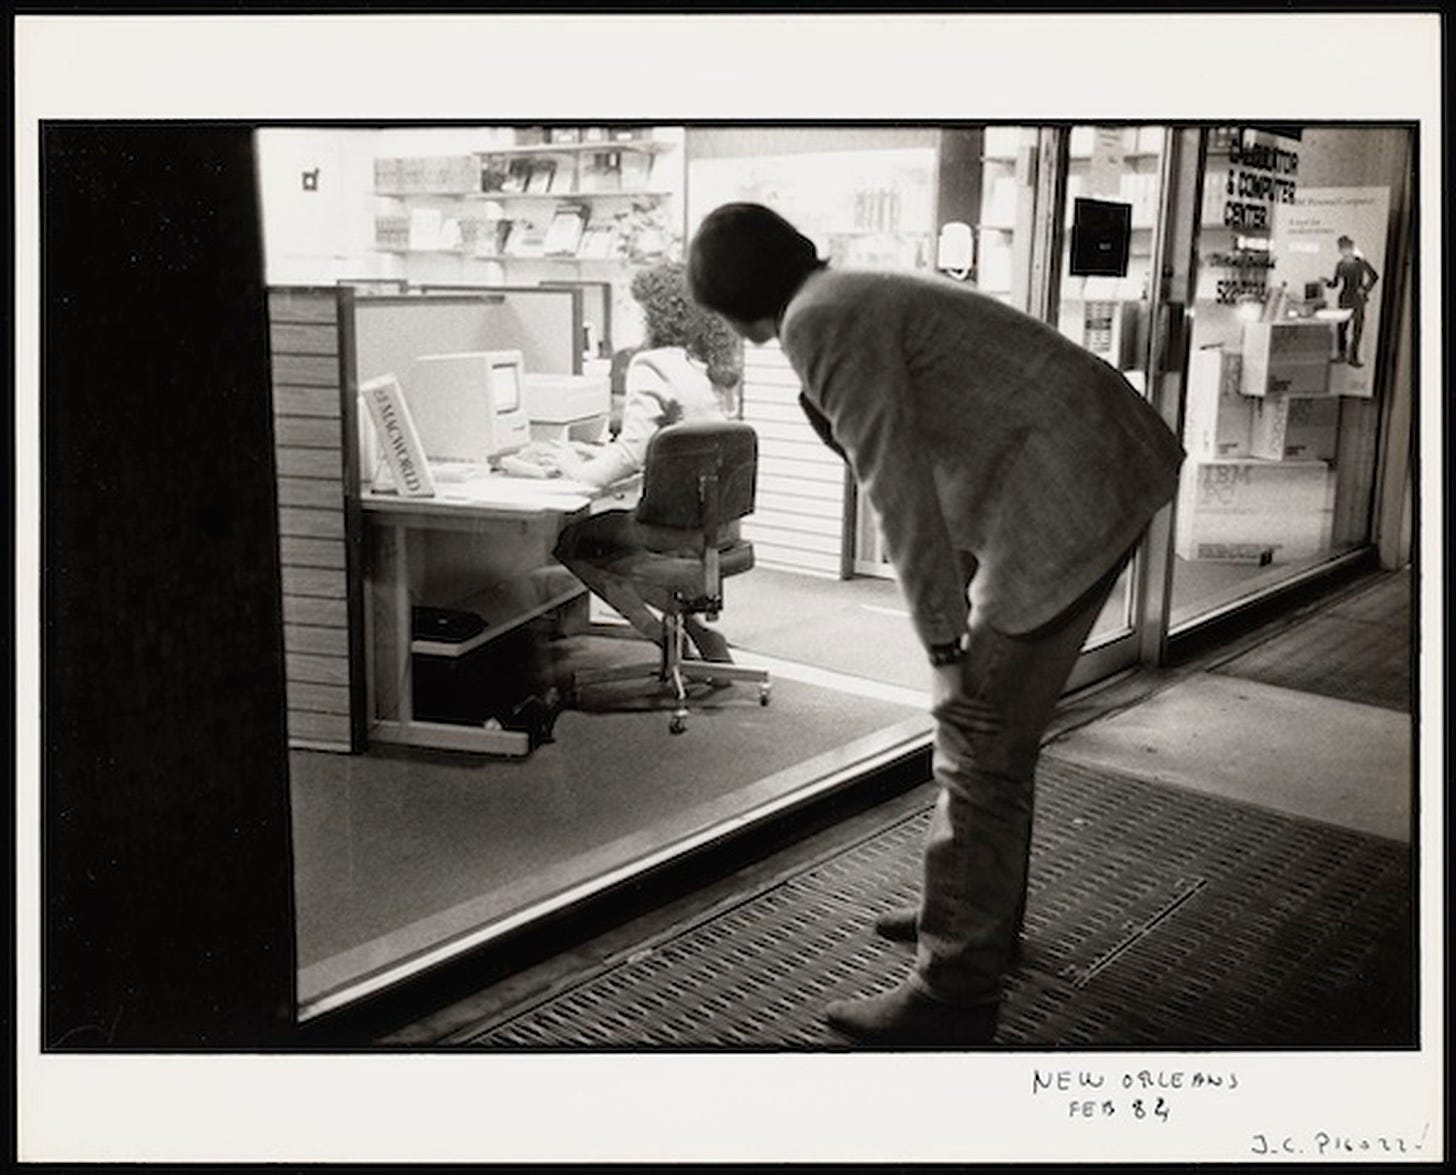 A photo of Steve Jobs looking at somebody using a Macintosh.